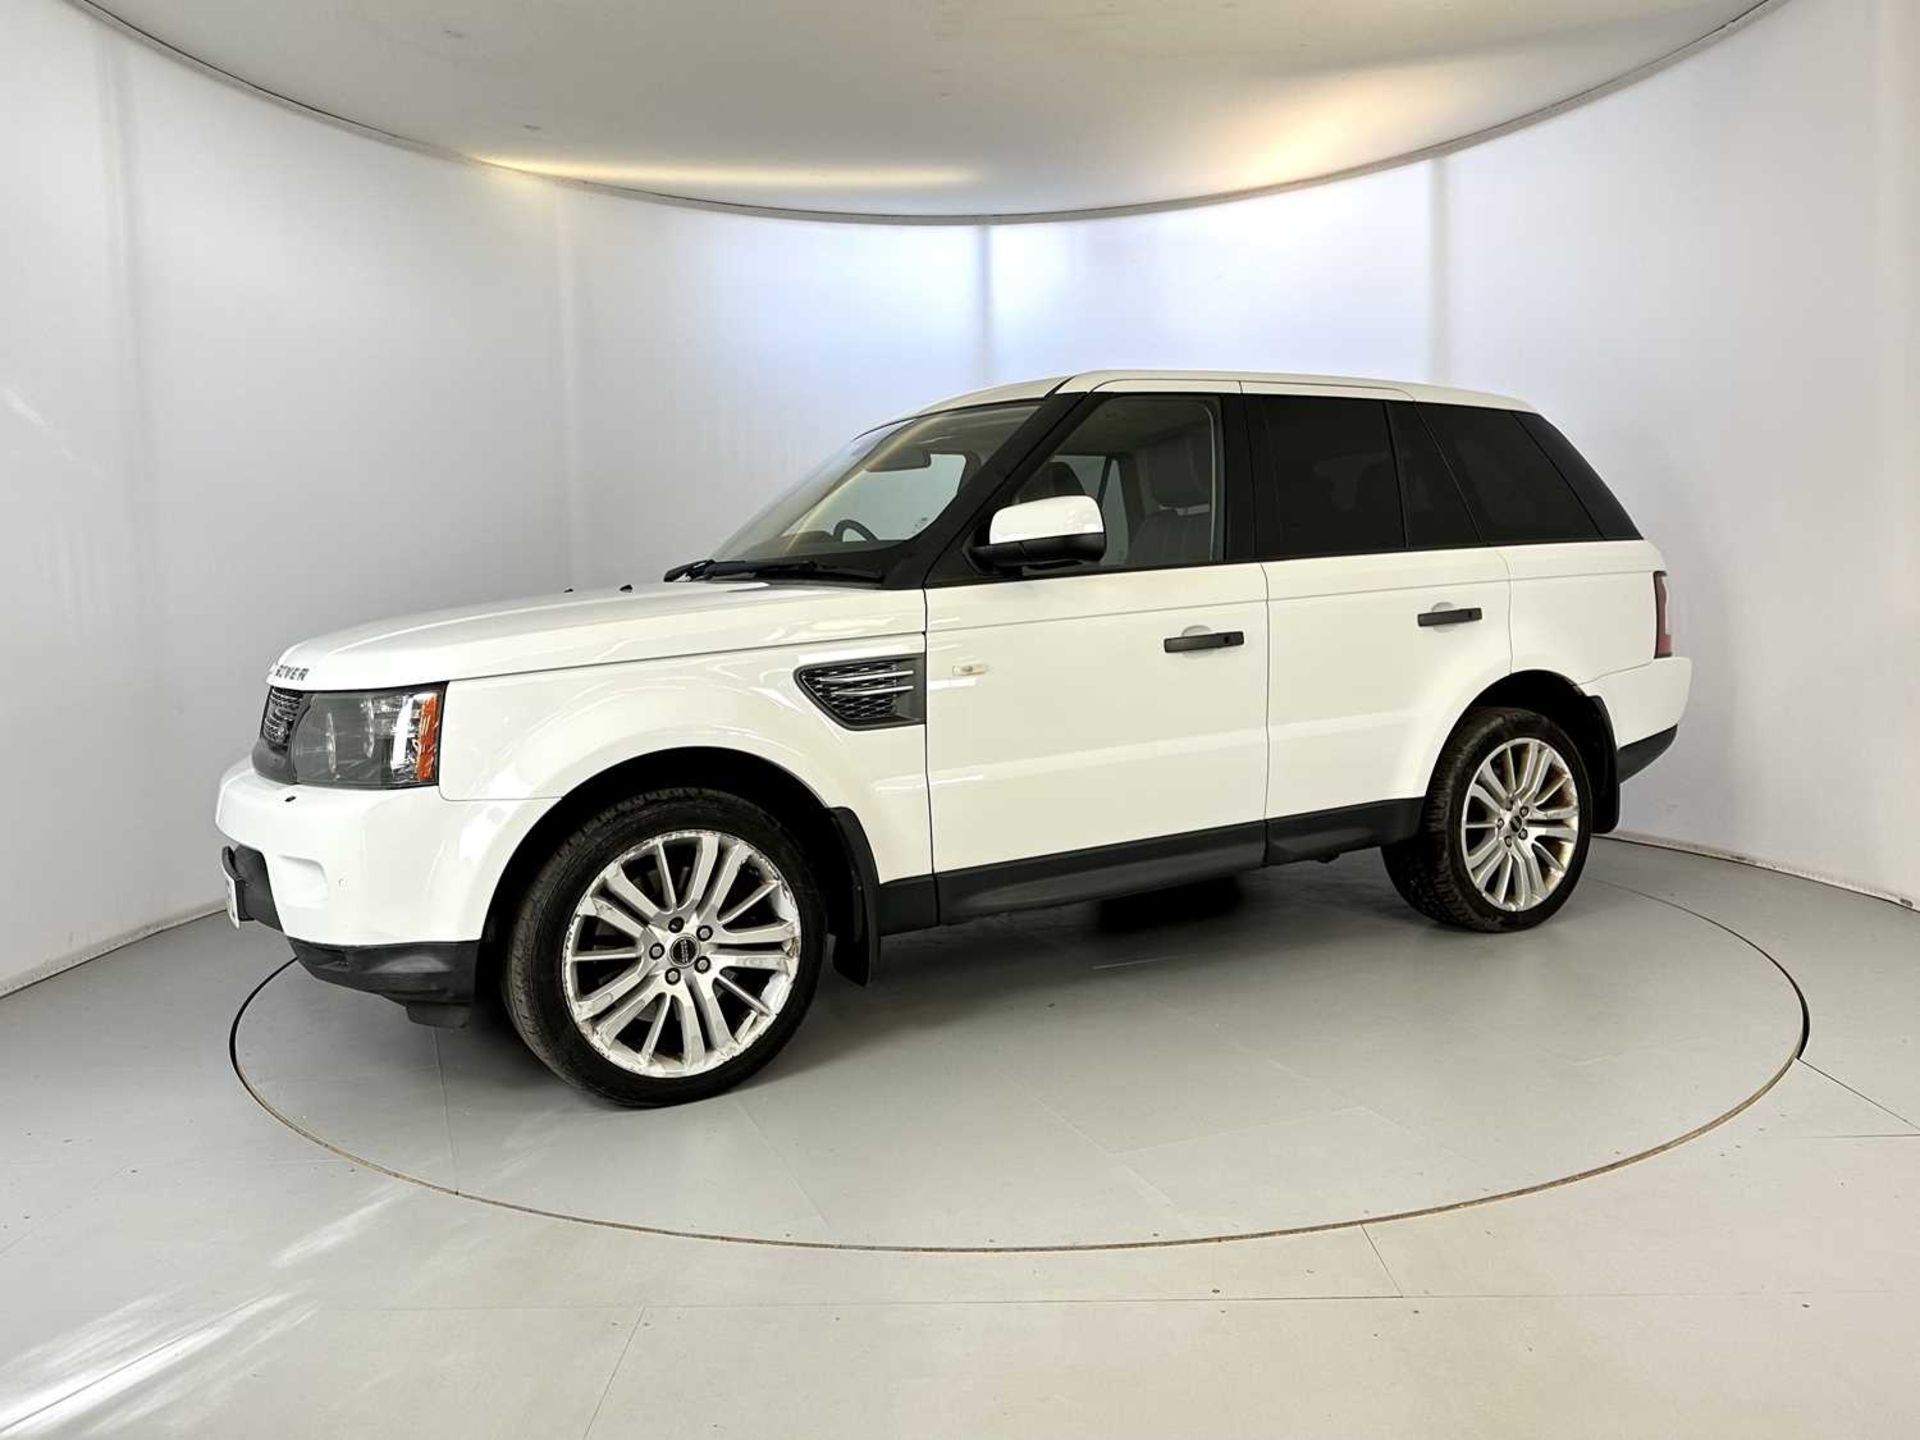 2010 Land Rover Range Rover Sport - Image 4 of 34